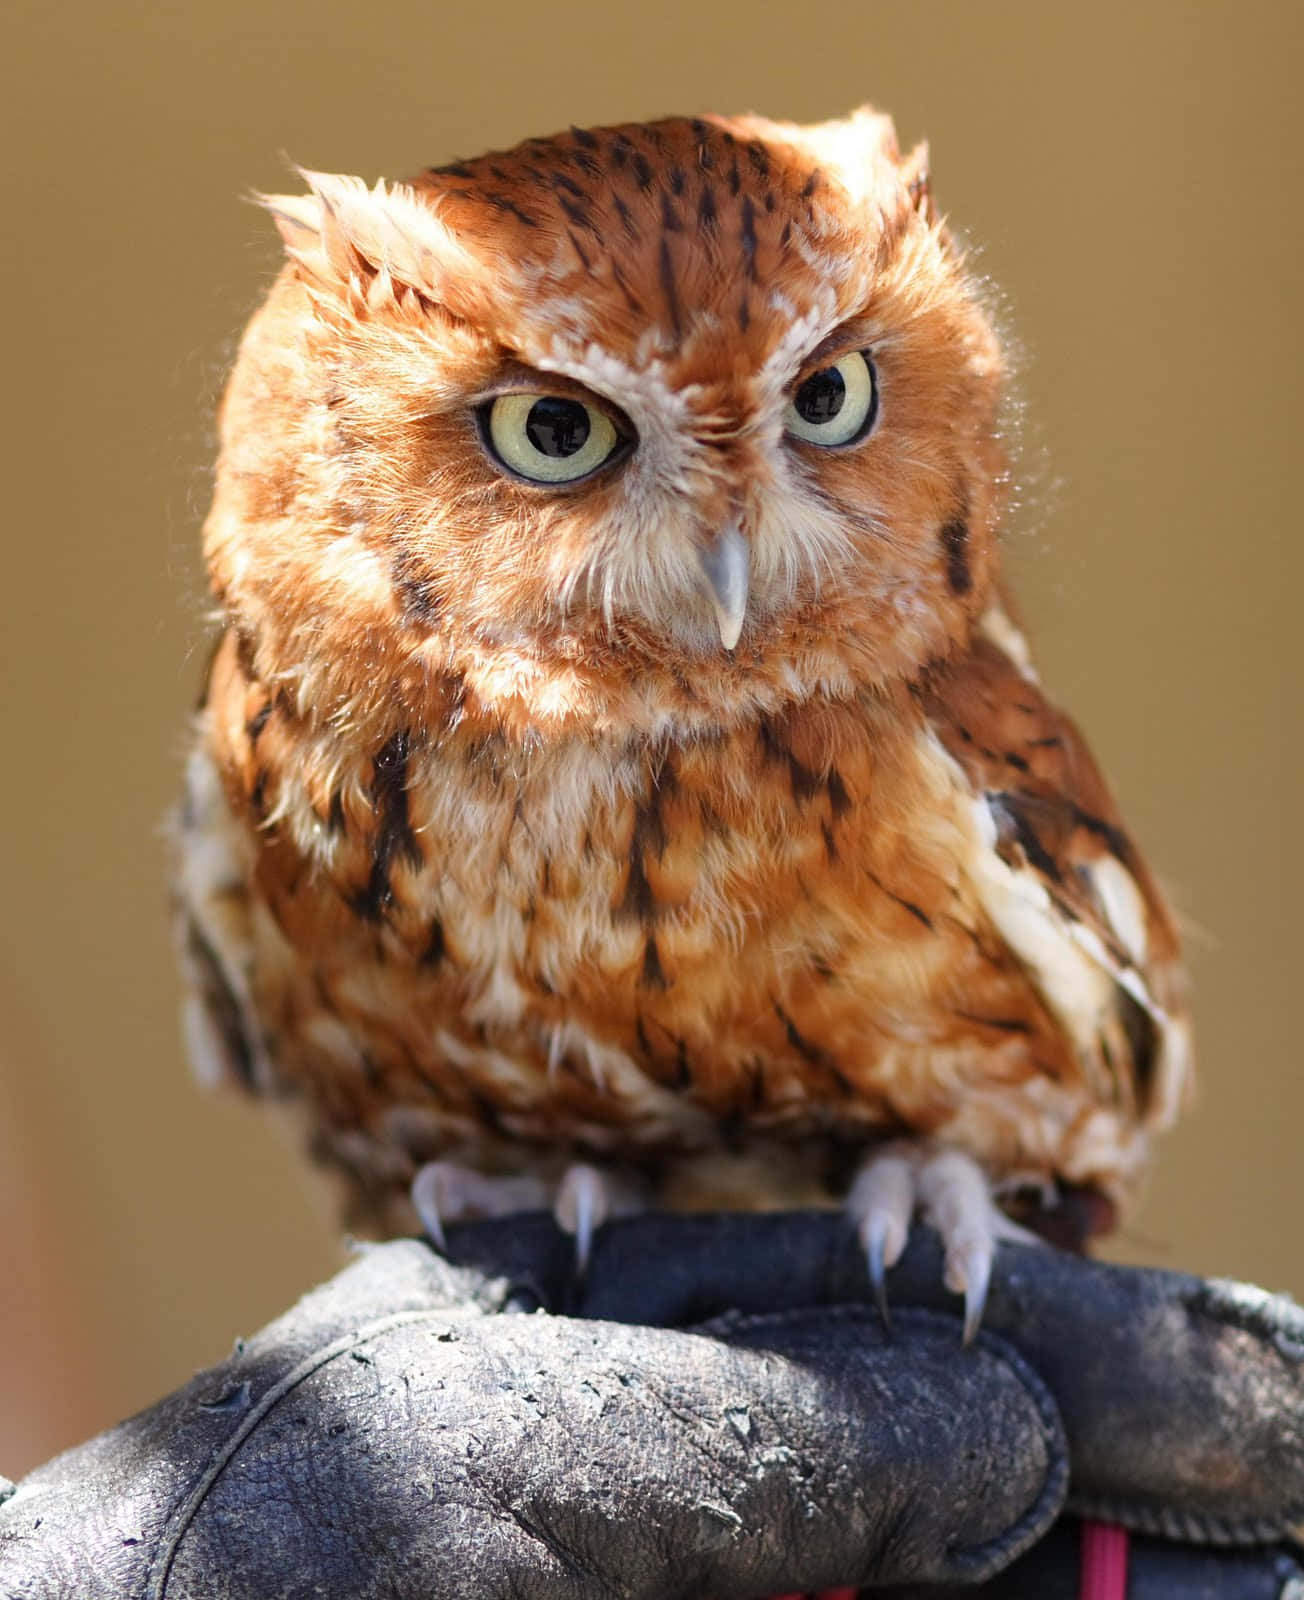 A Brown Owl On A Person's Hand